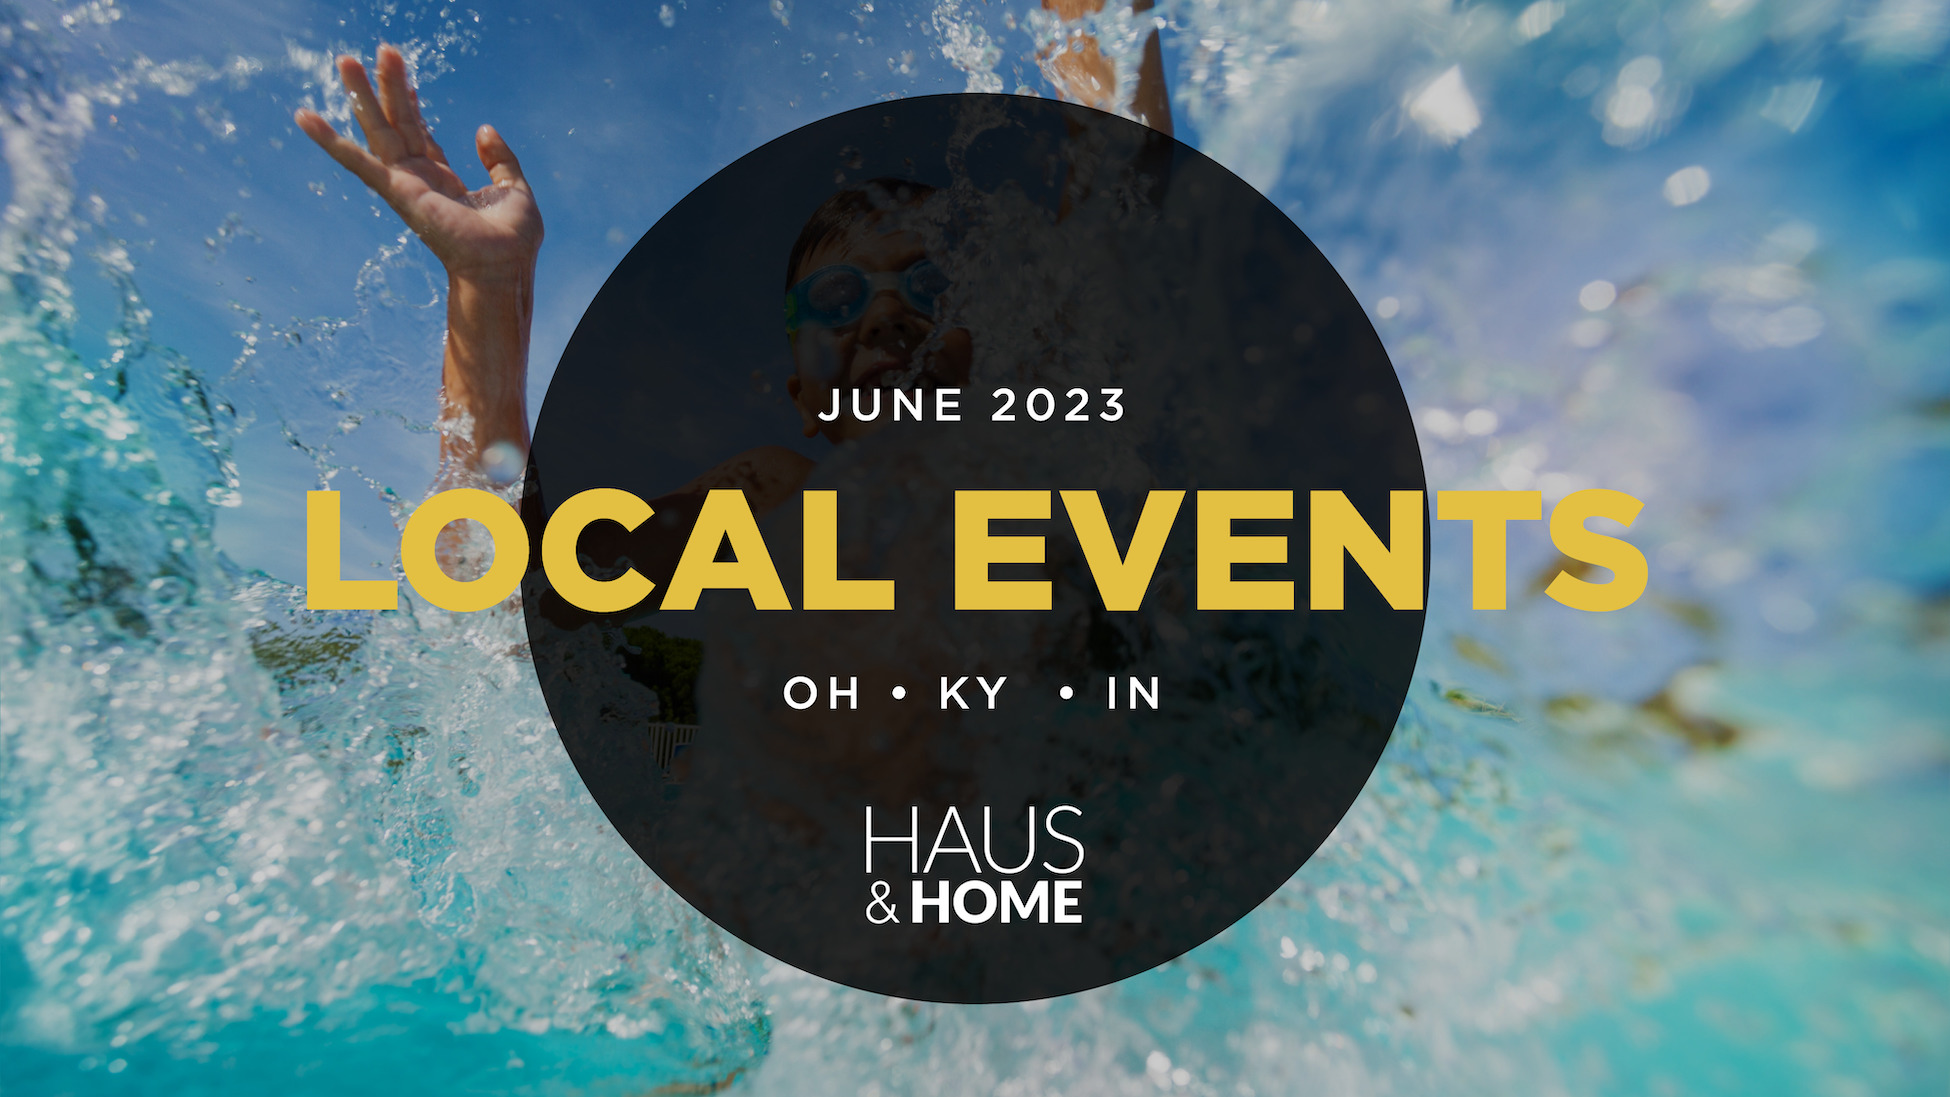 June 2023 Local Events Haus & Home